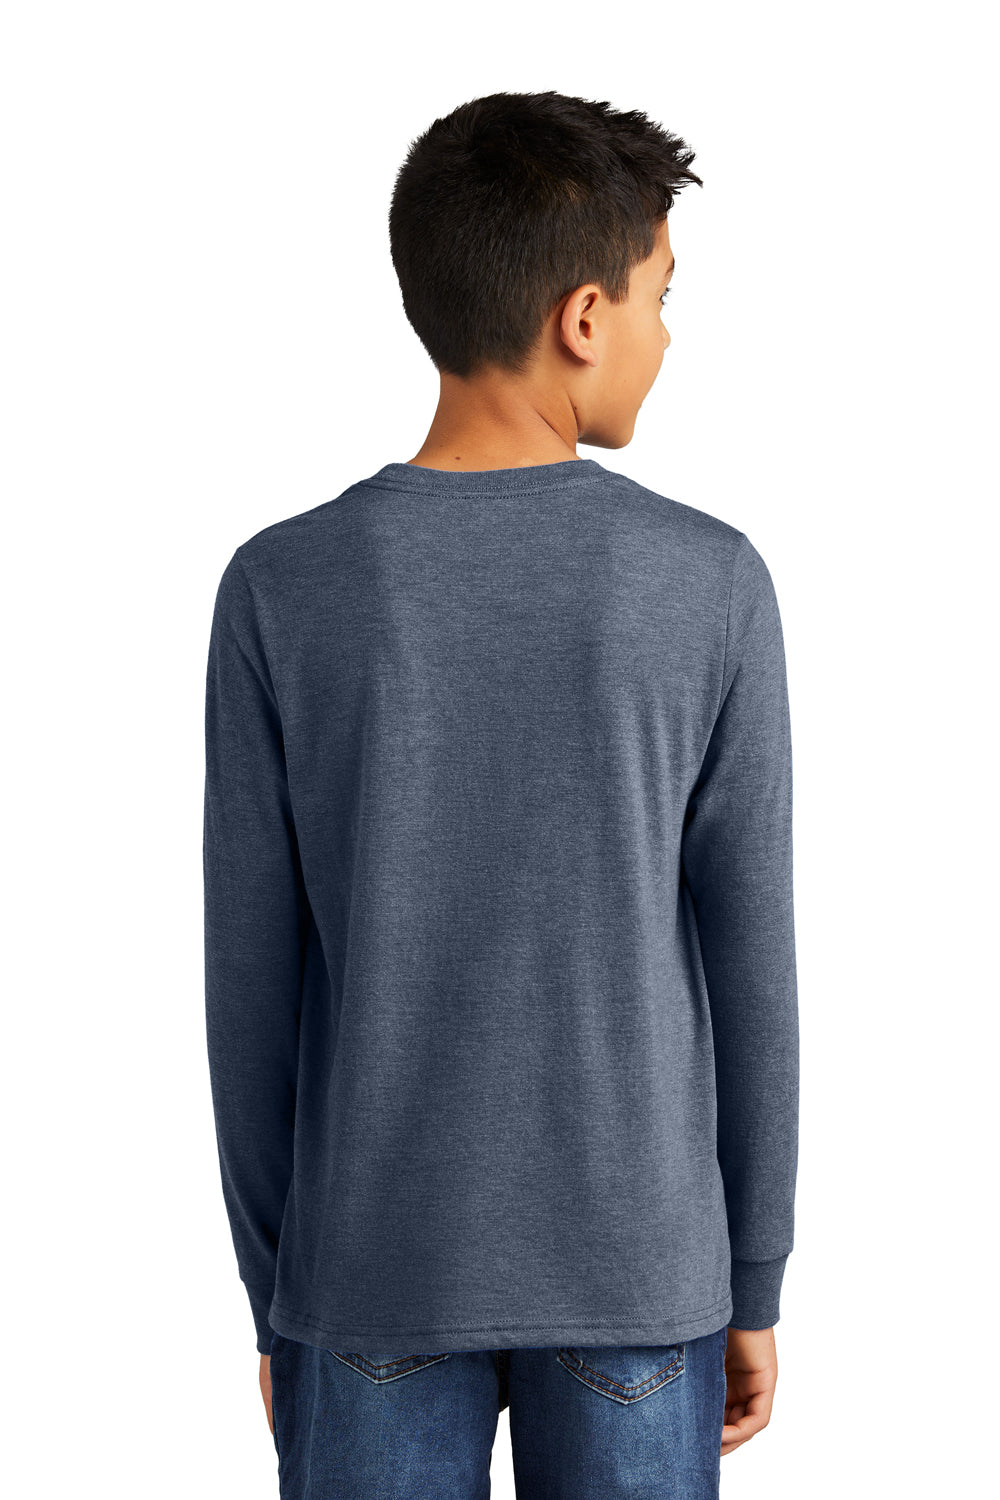 District Youth Perfect Tri Long Sleeve Crewneck T-Shirt Navy Blue Frost Back